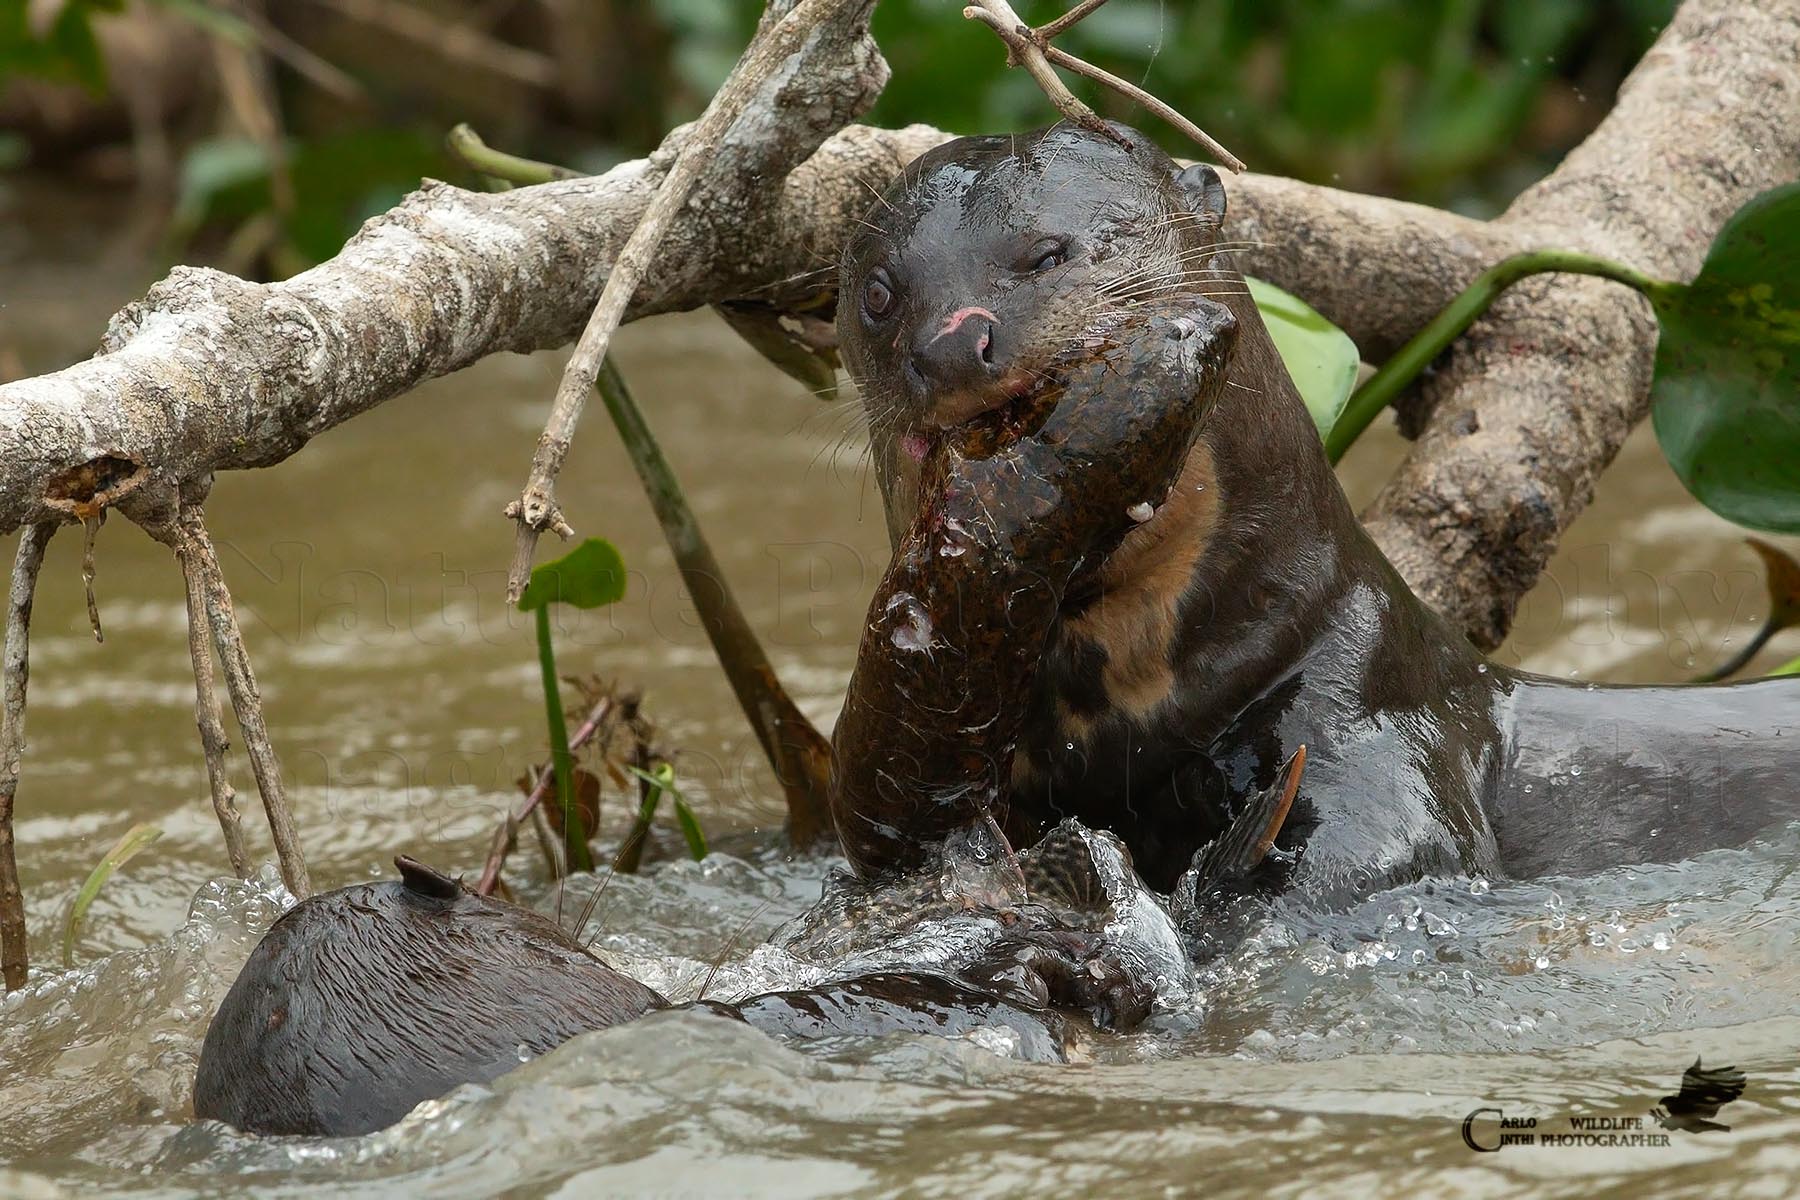 Giant Otter with prey...